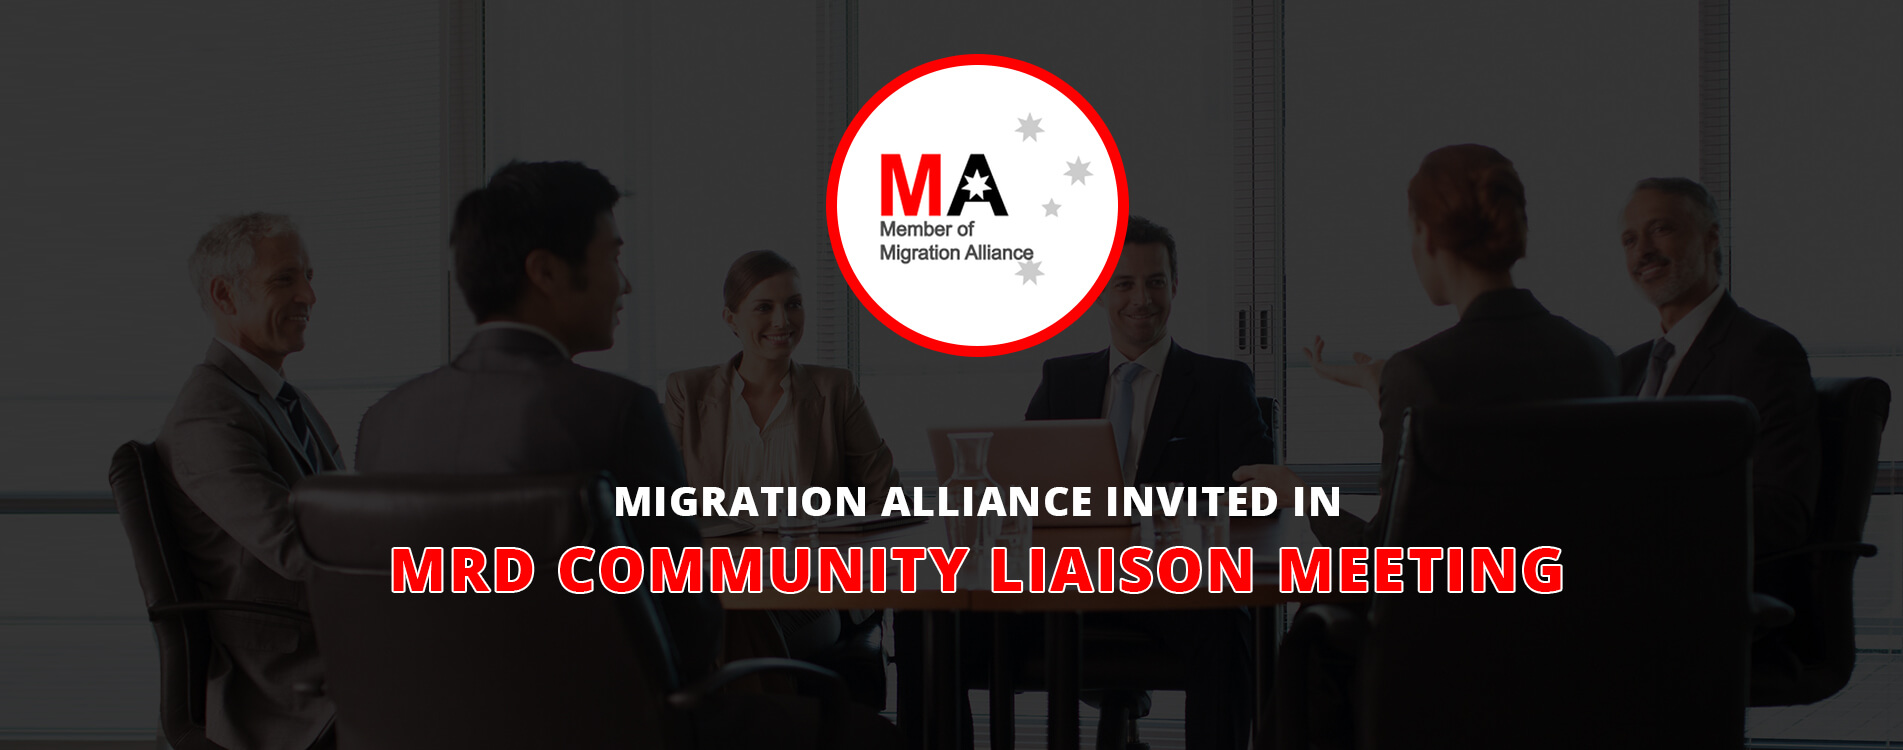 Migration Alliance Invited for MRD Community Liaison Meeting